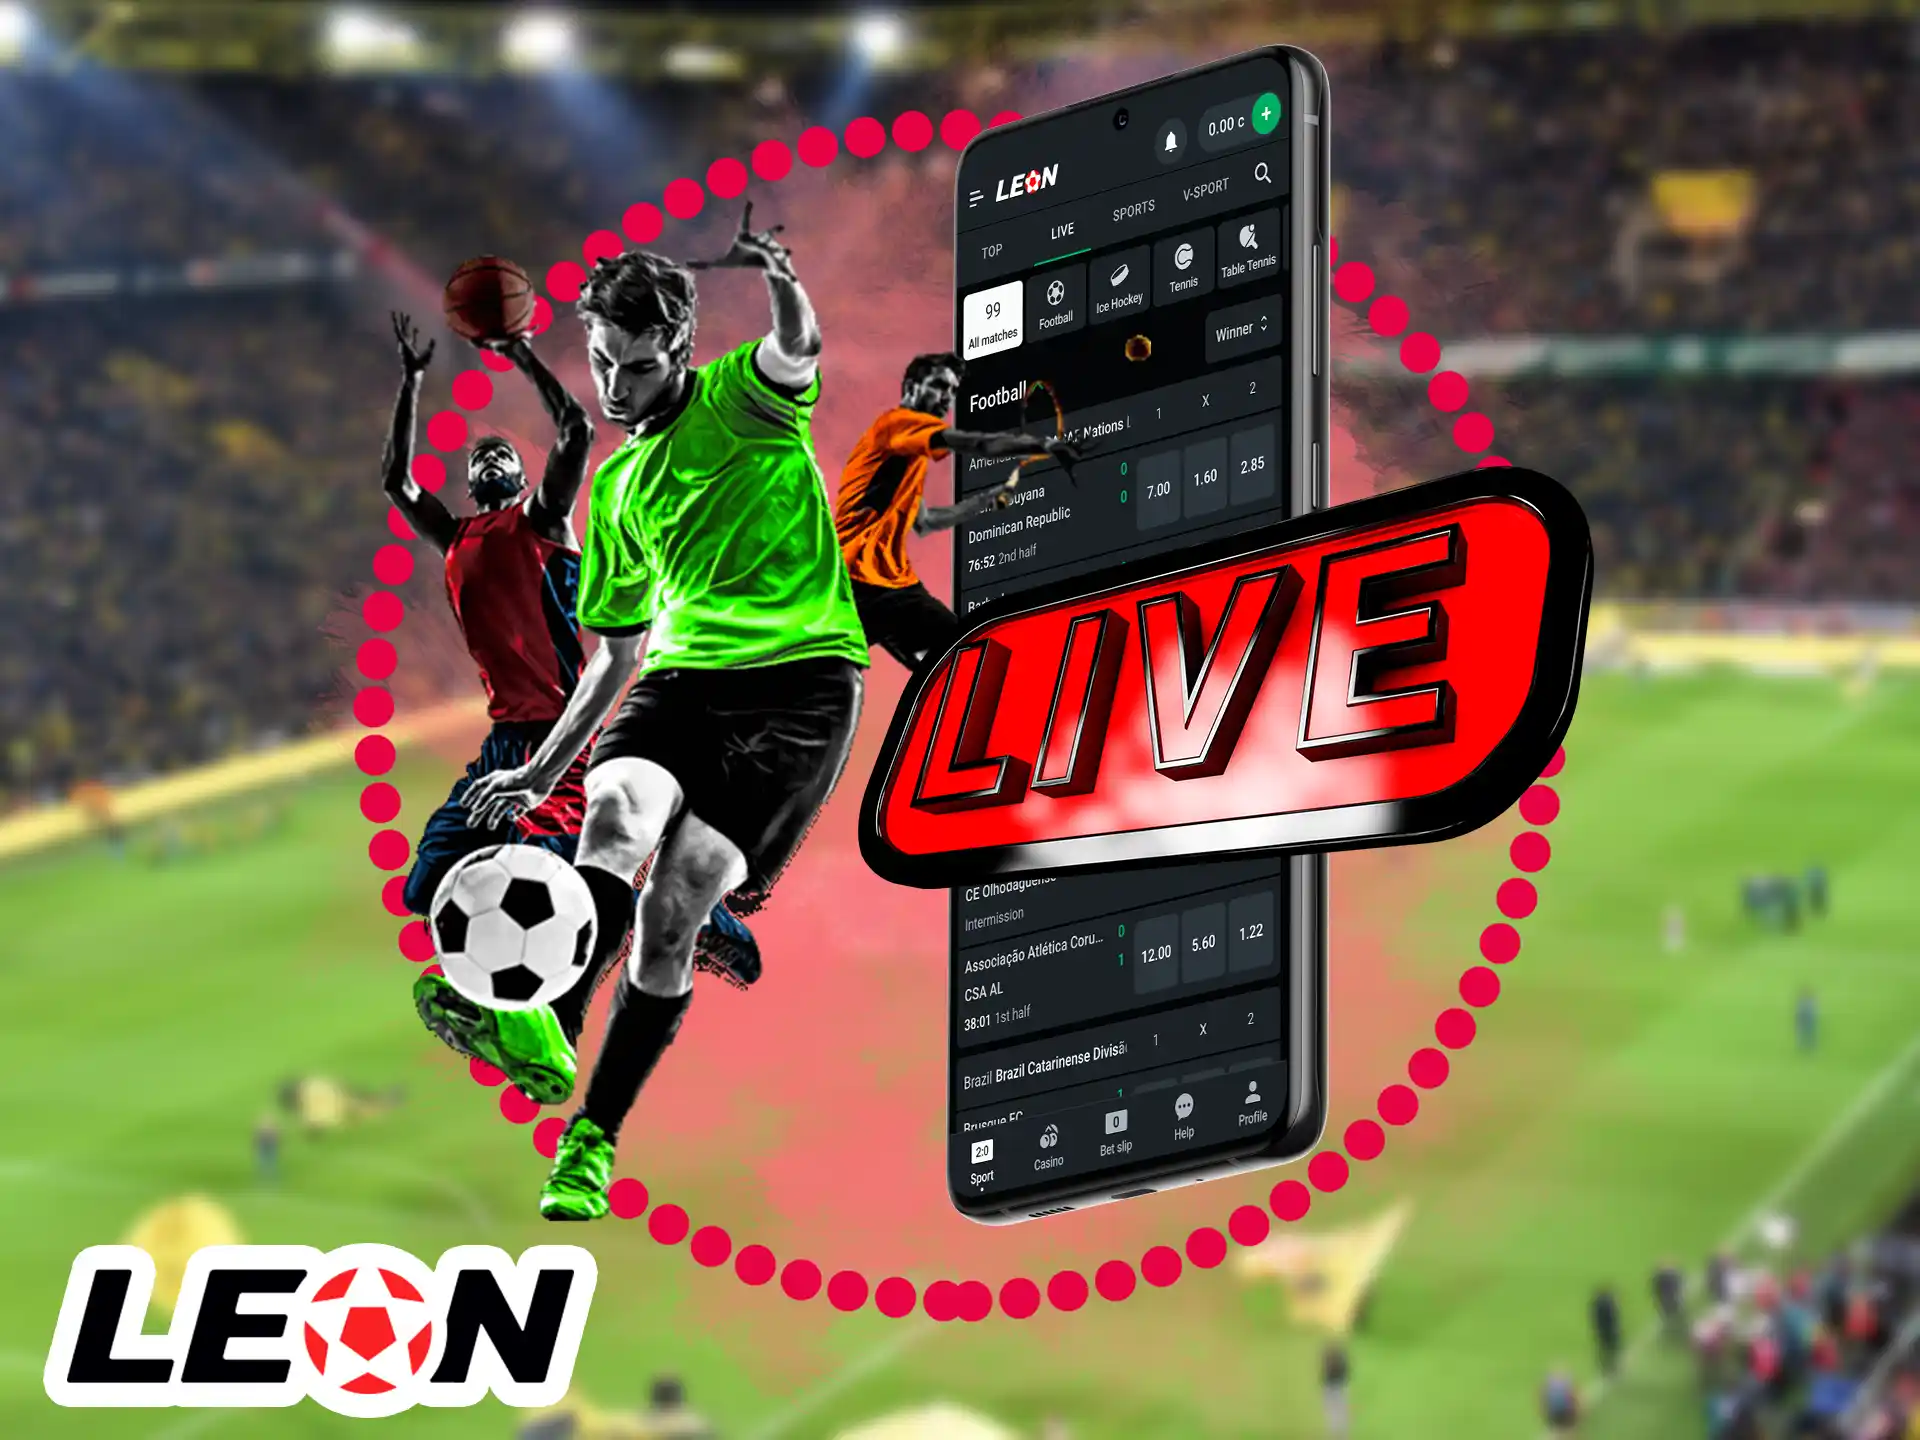 This option allows the player to enjoy the match broadcast, as well as to make bets during the match, which increases the odds and the chances of winning.